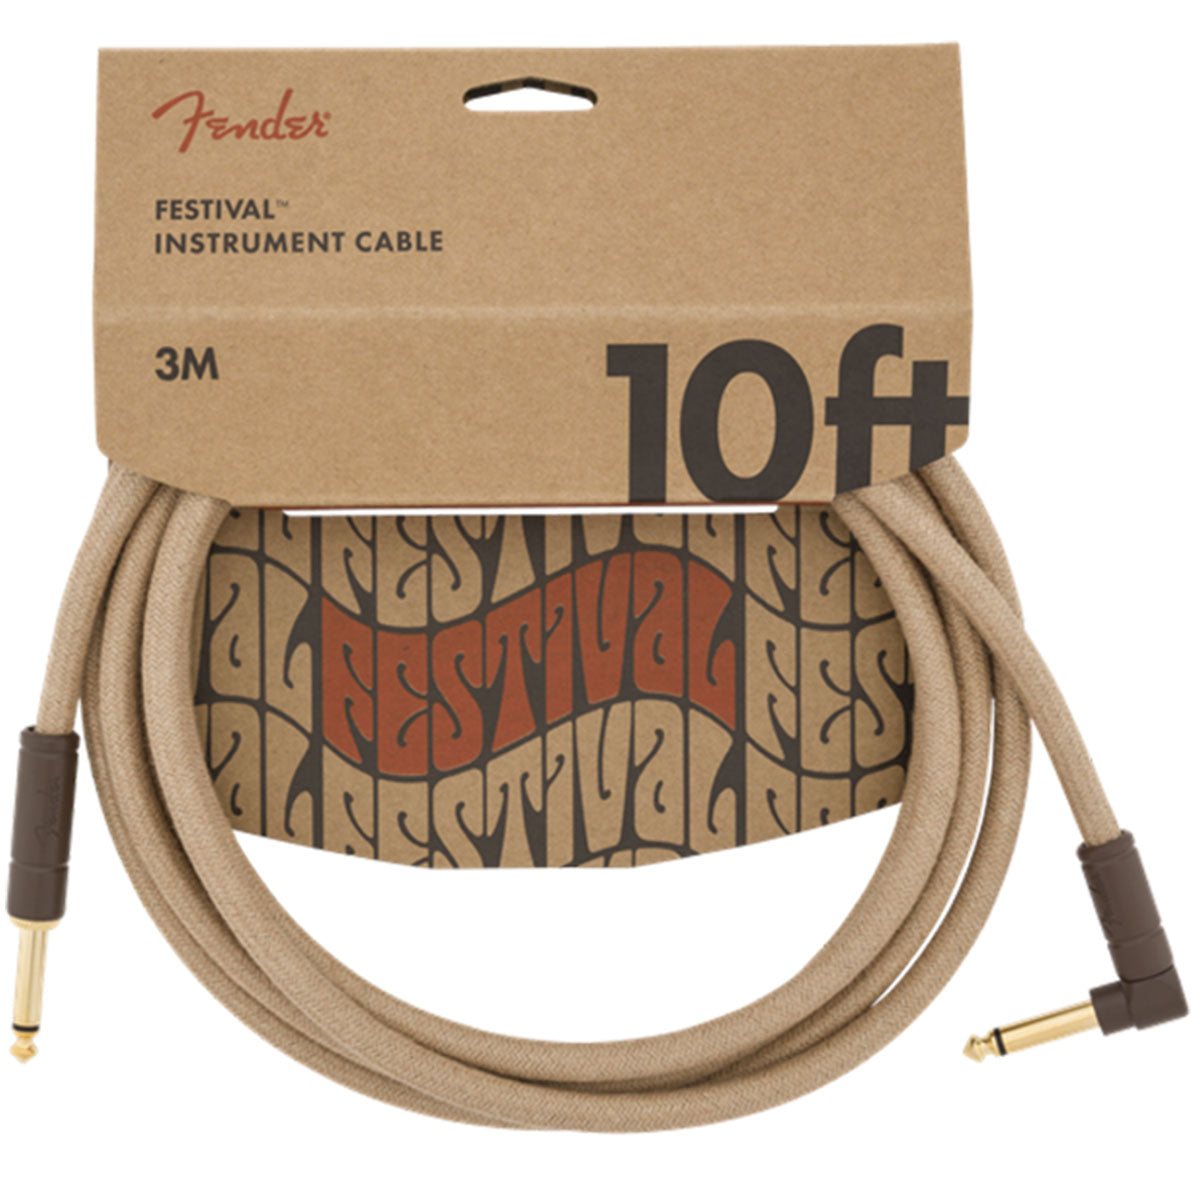 Fender Festival Guitar Cable 3m (10ft) Angled Instrument Lead Pure Hemp Natural - 0990910021